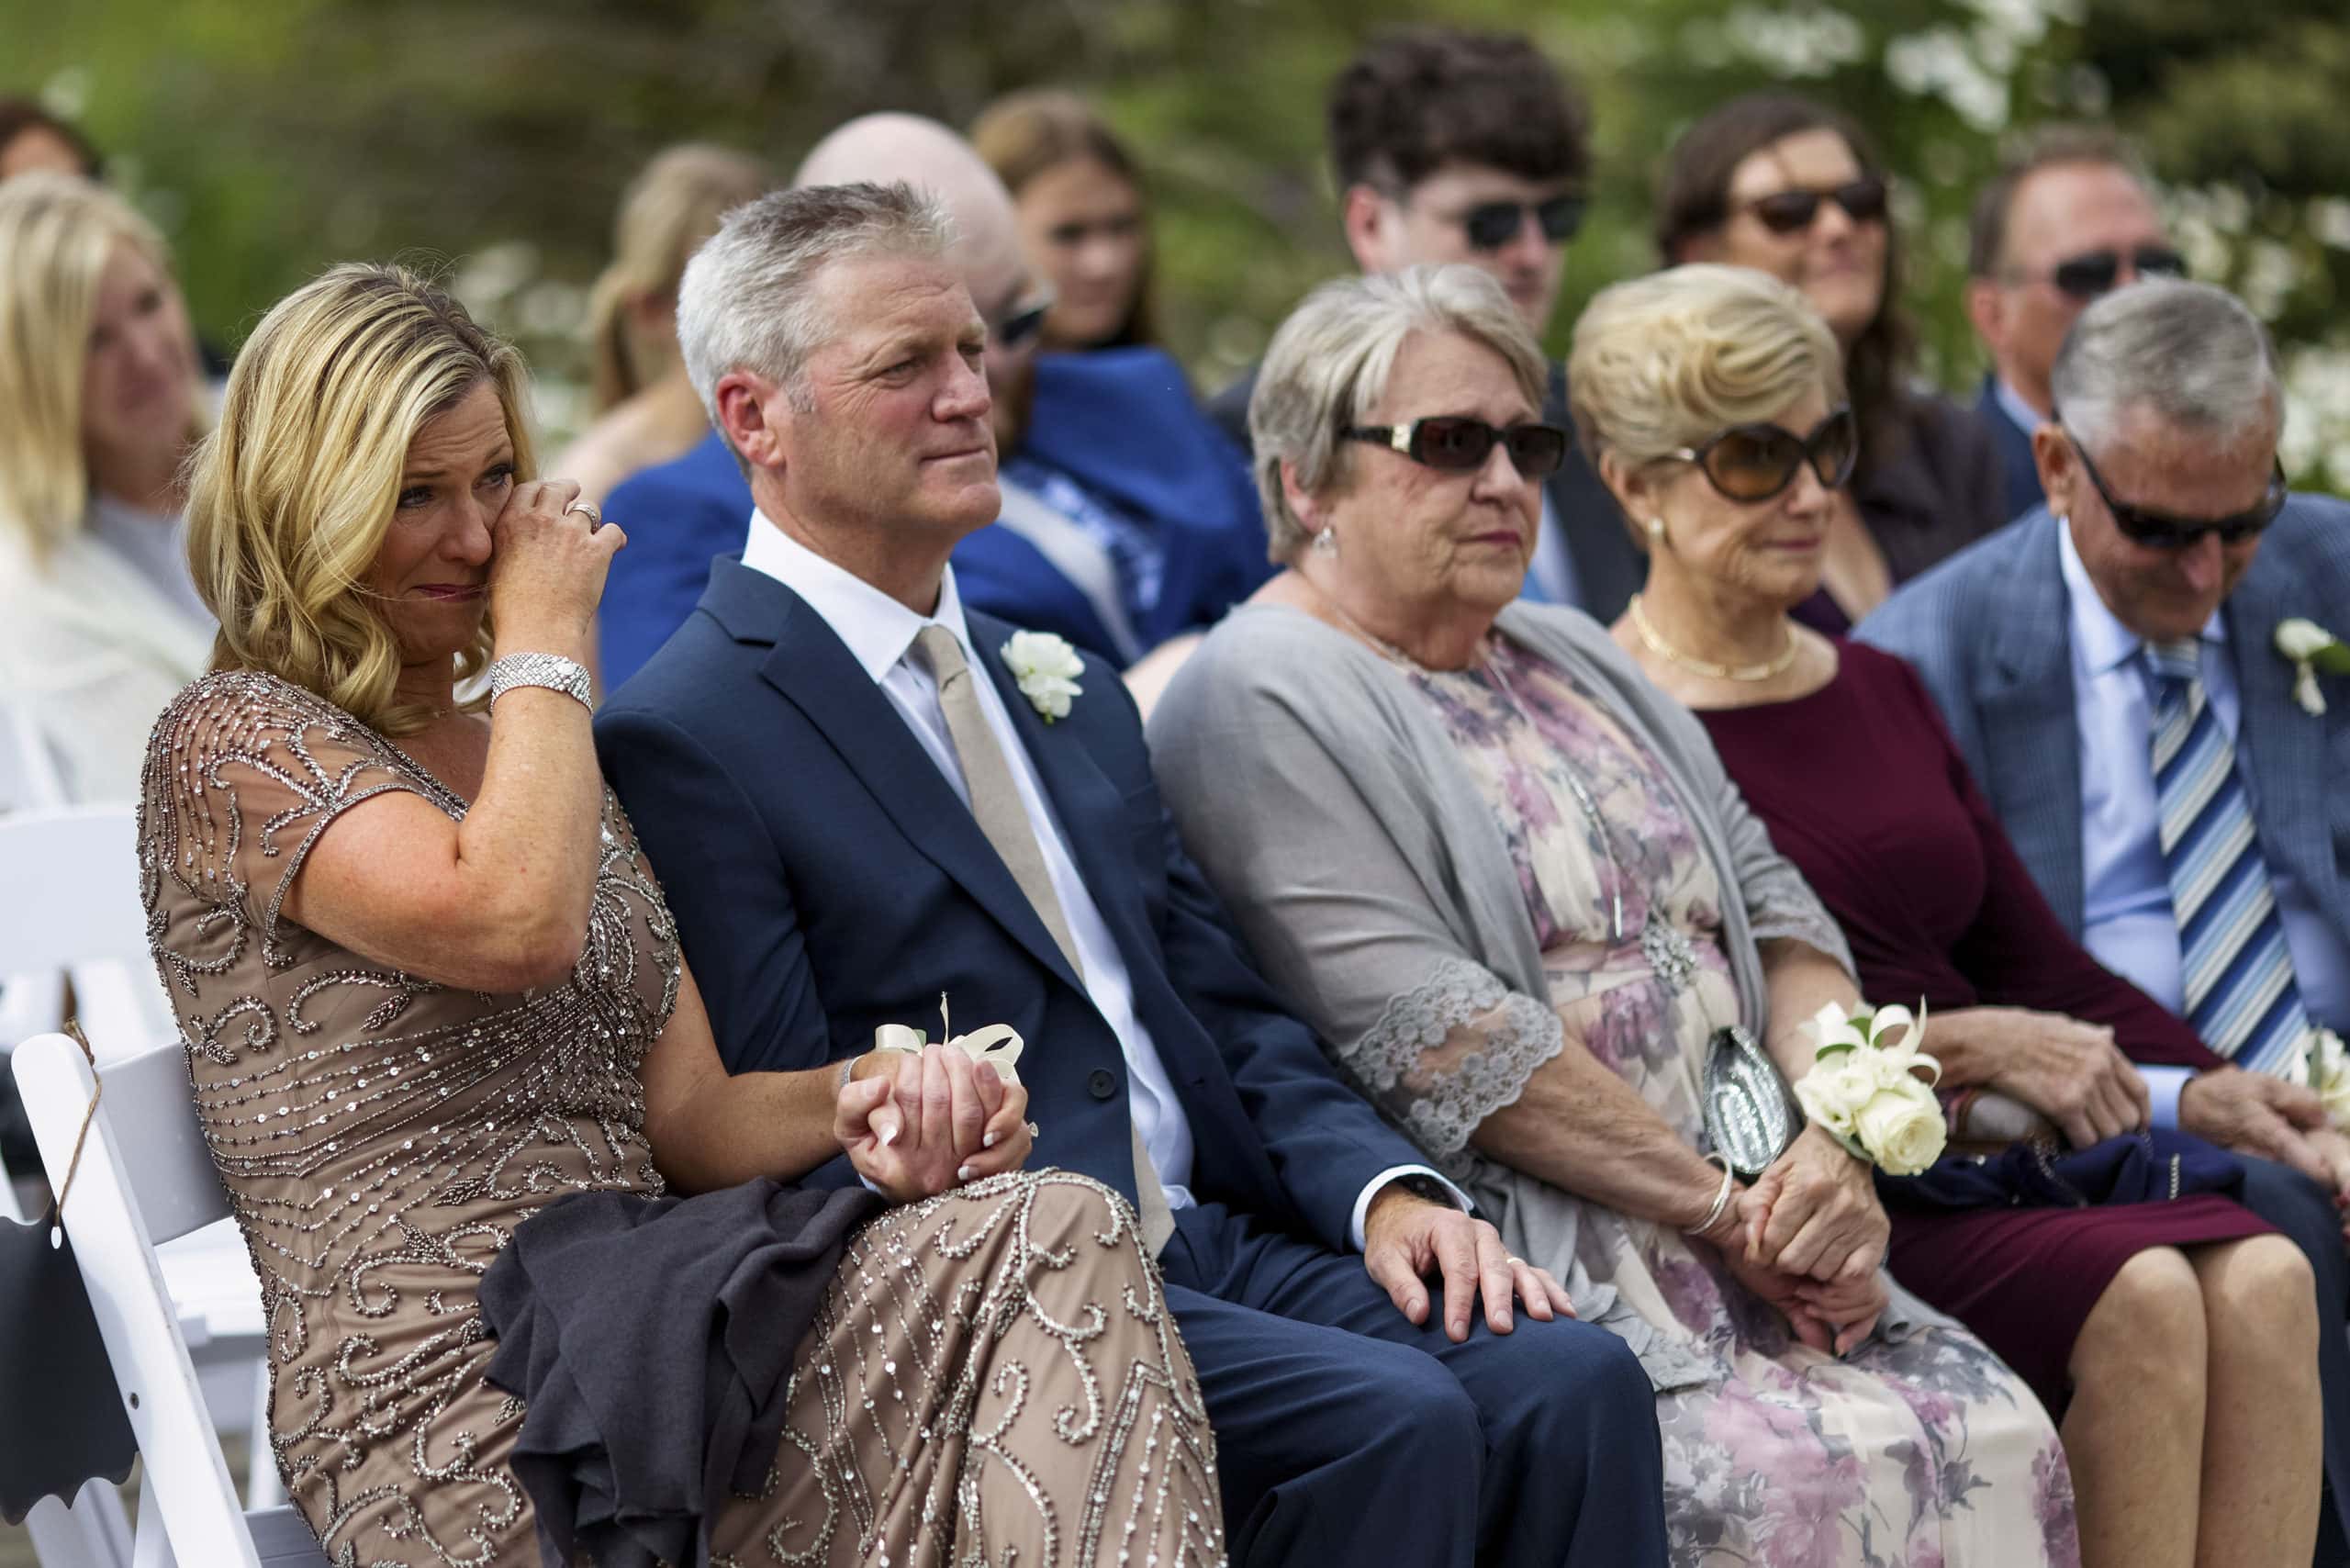 The mother of the bride wipes a tear away during the ceremony